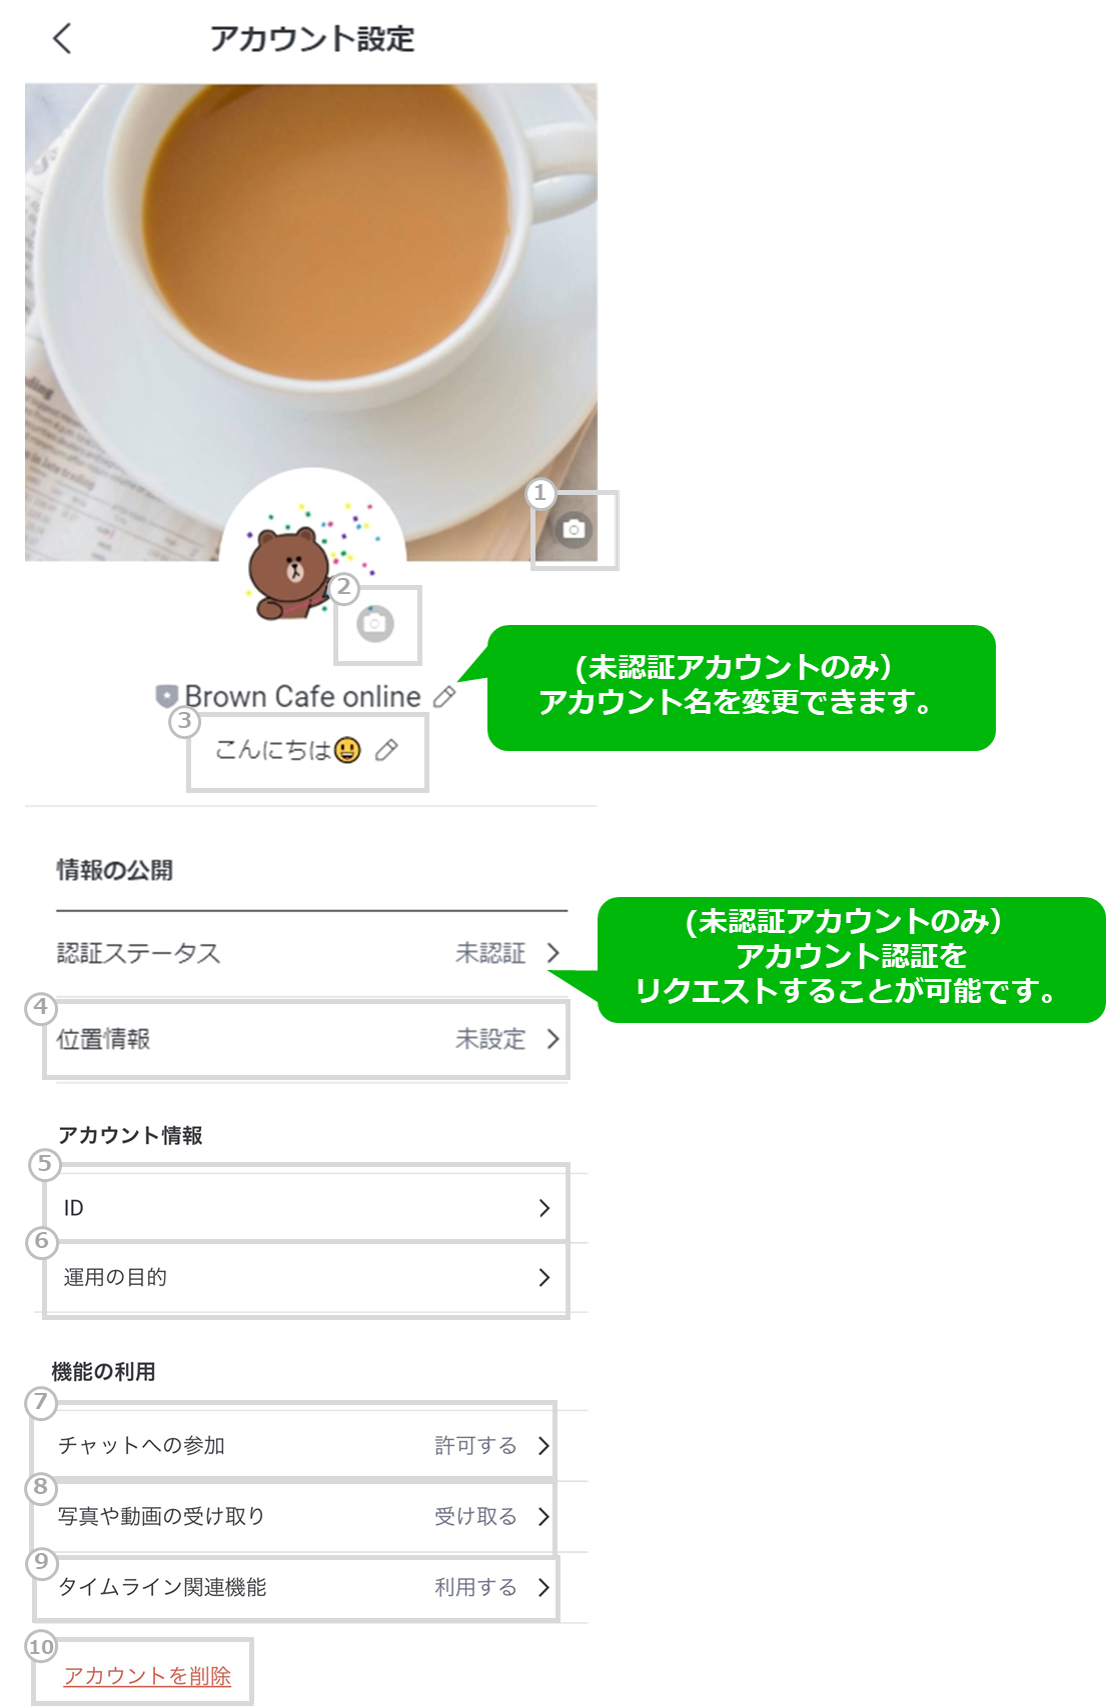 Line公式アカウント Line Official Account Manager アカウント設定マニュアル Line For Business